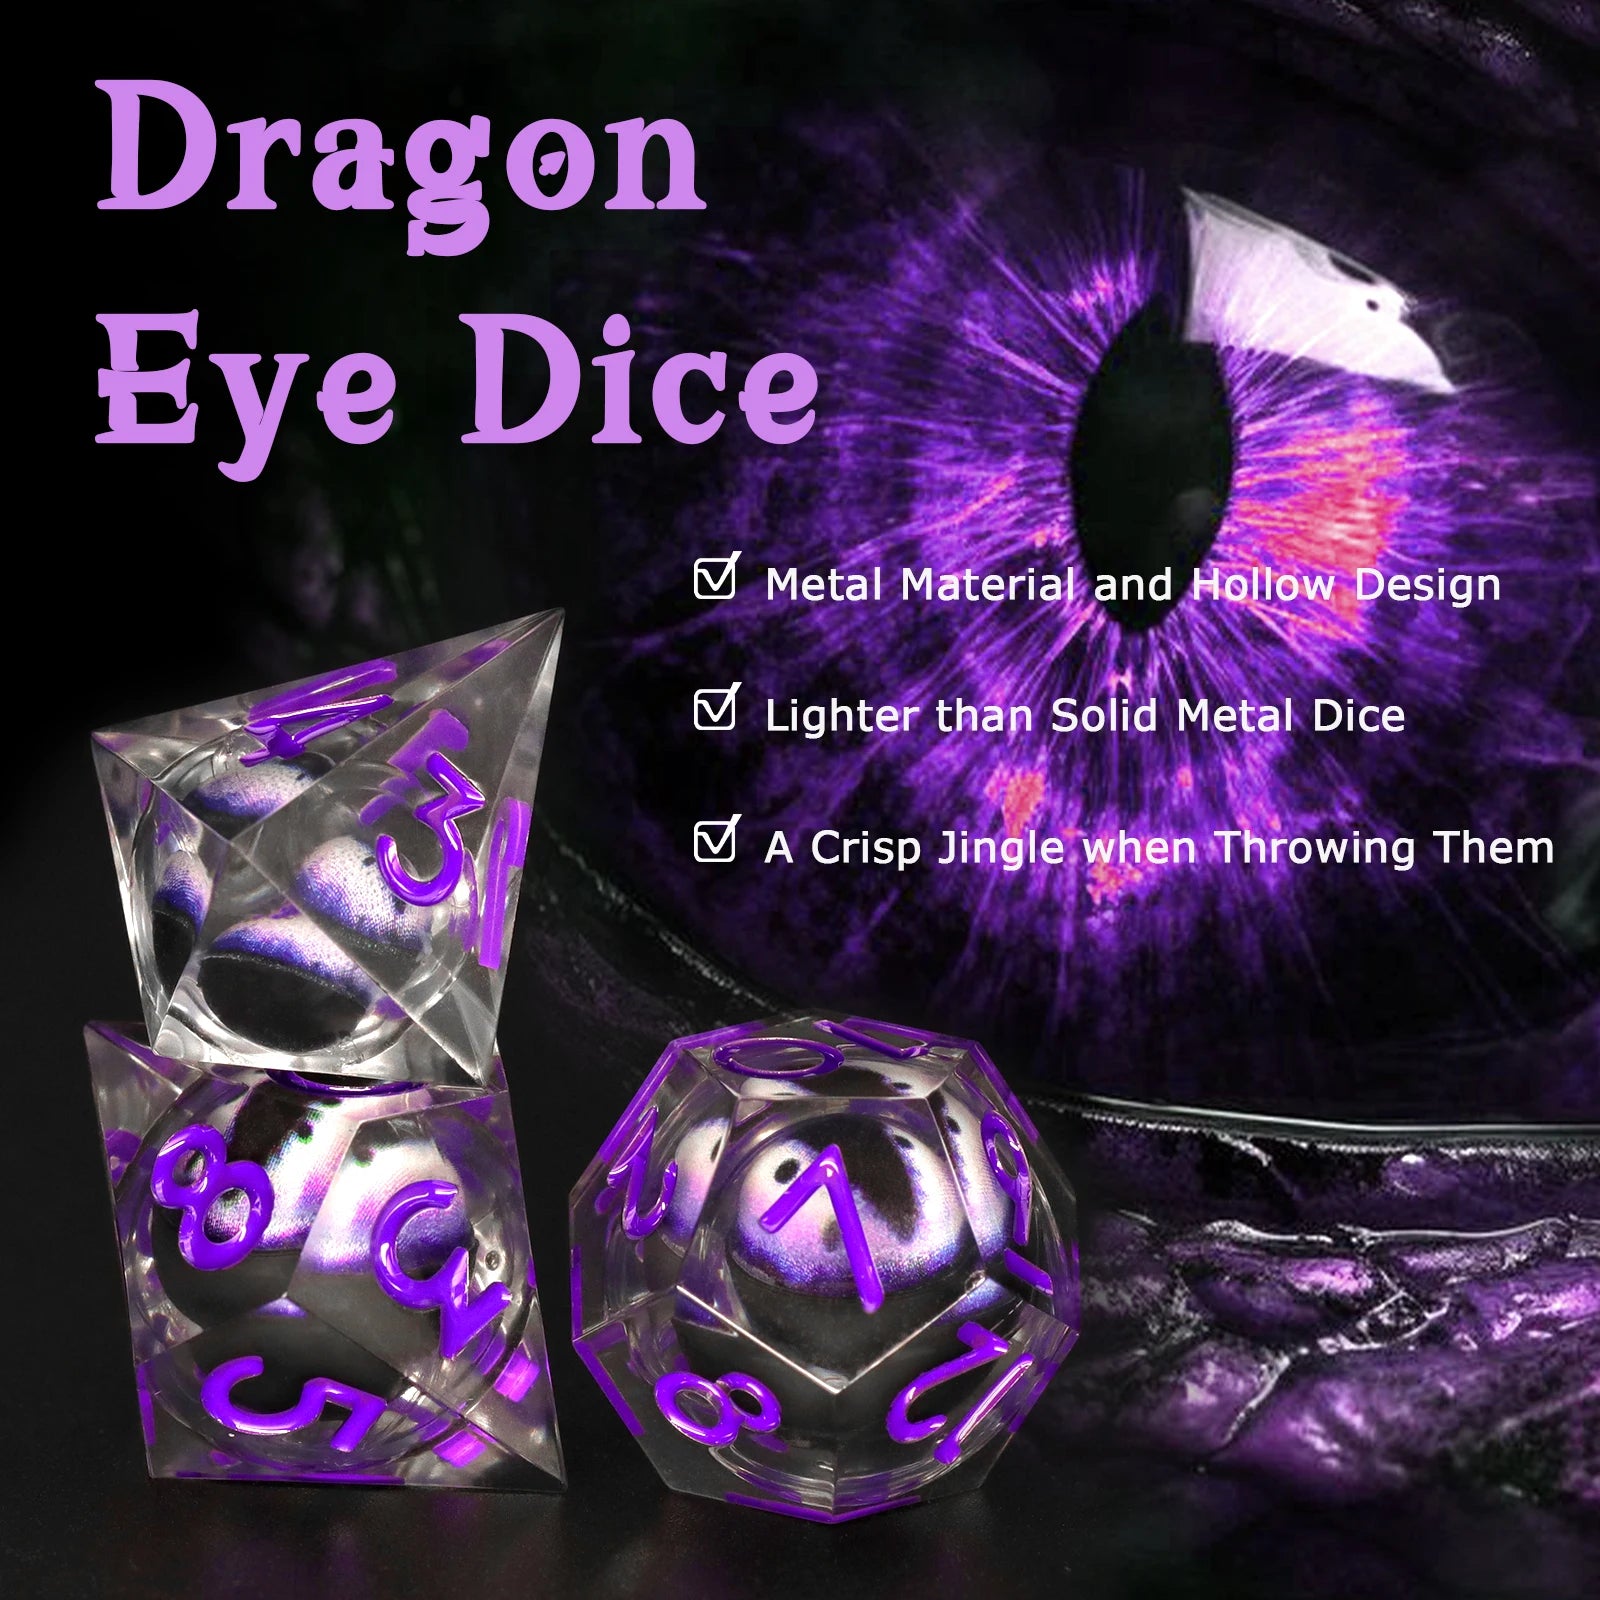 Sharp Edge Resin Dice Set, Liquid Core DND Dice, Dragon Eye Dice Set Polyhedral D&D Dice For TTrpg Table Game